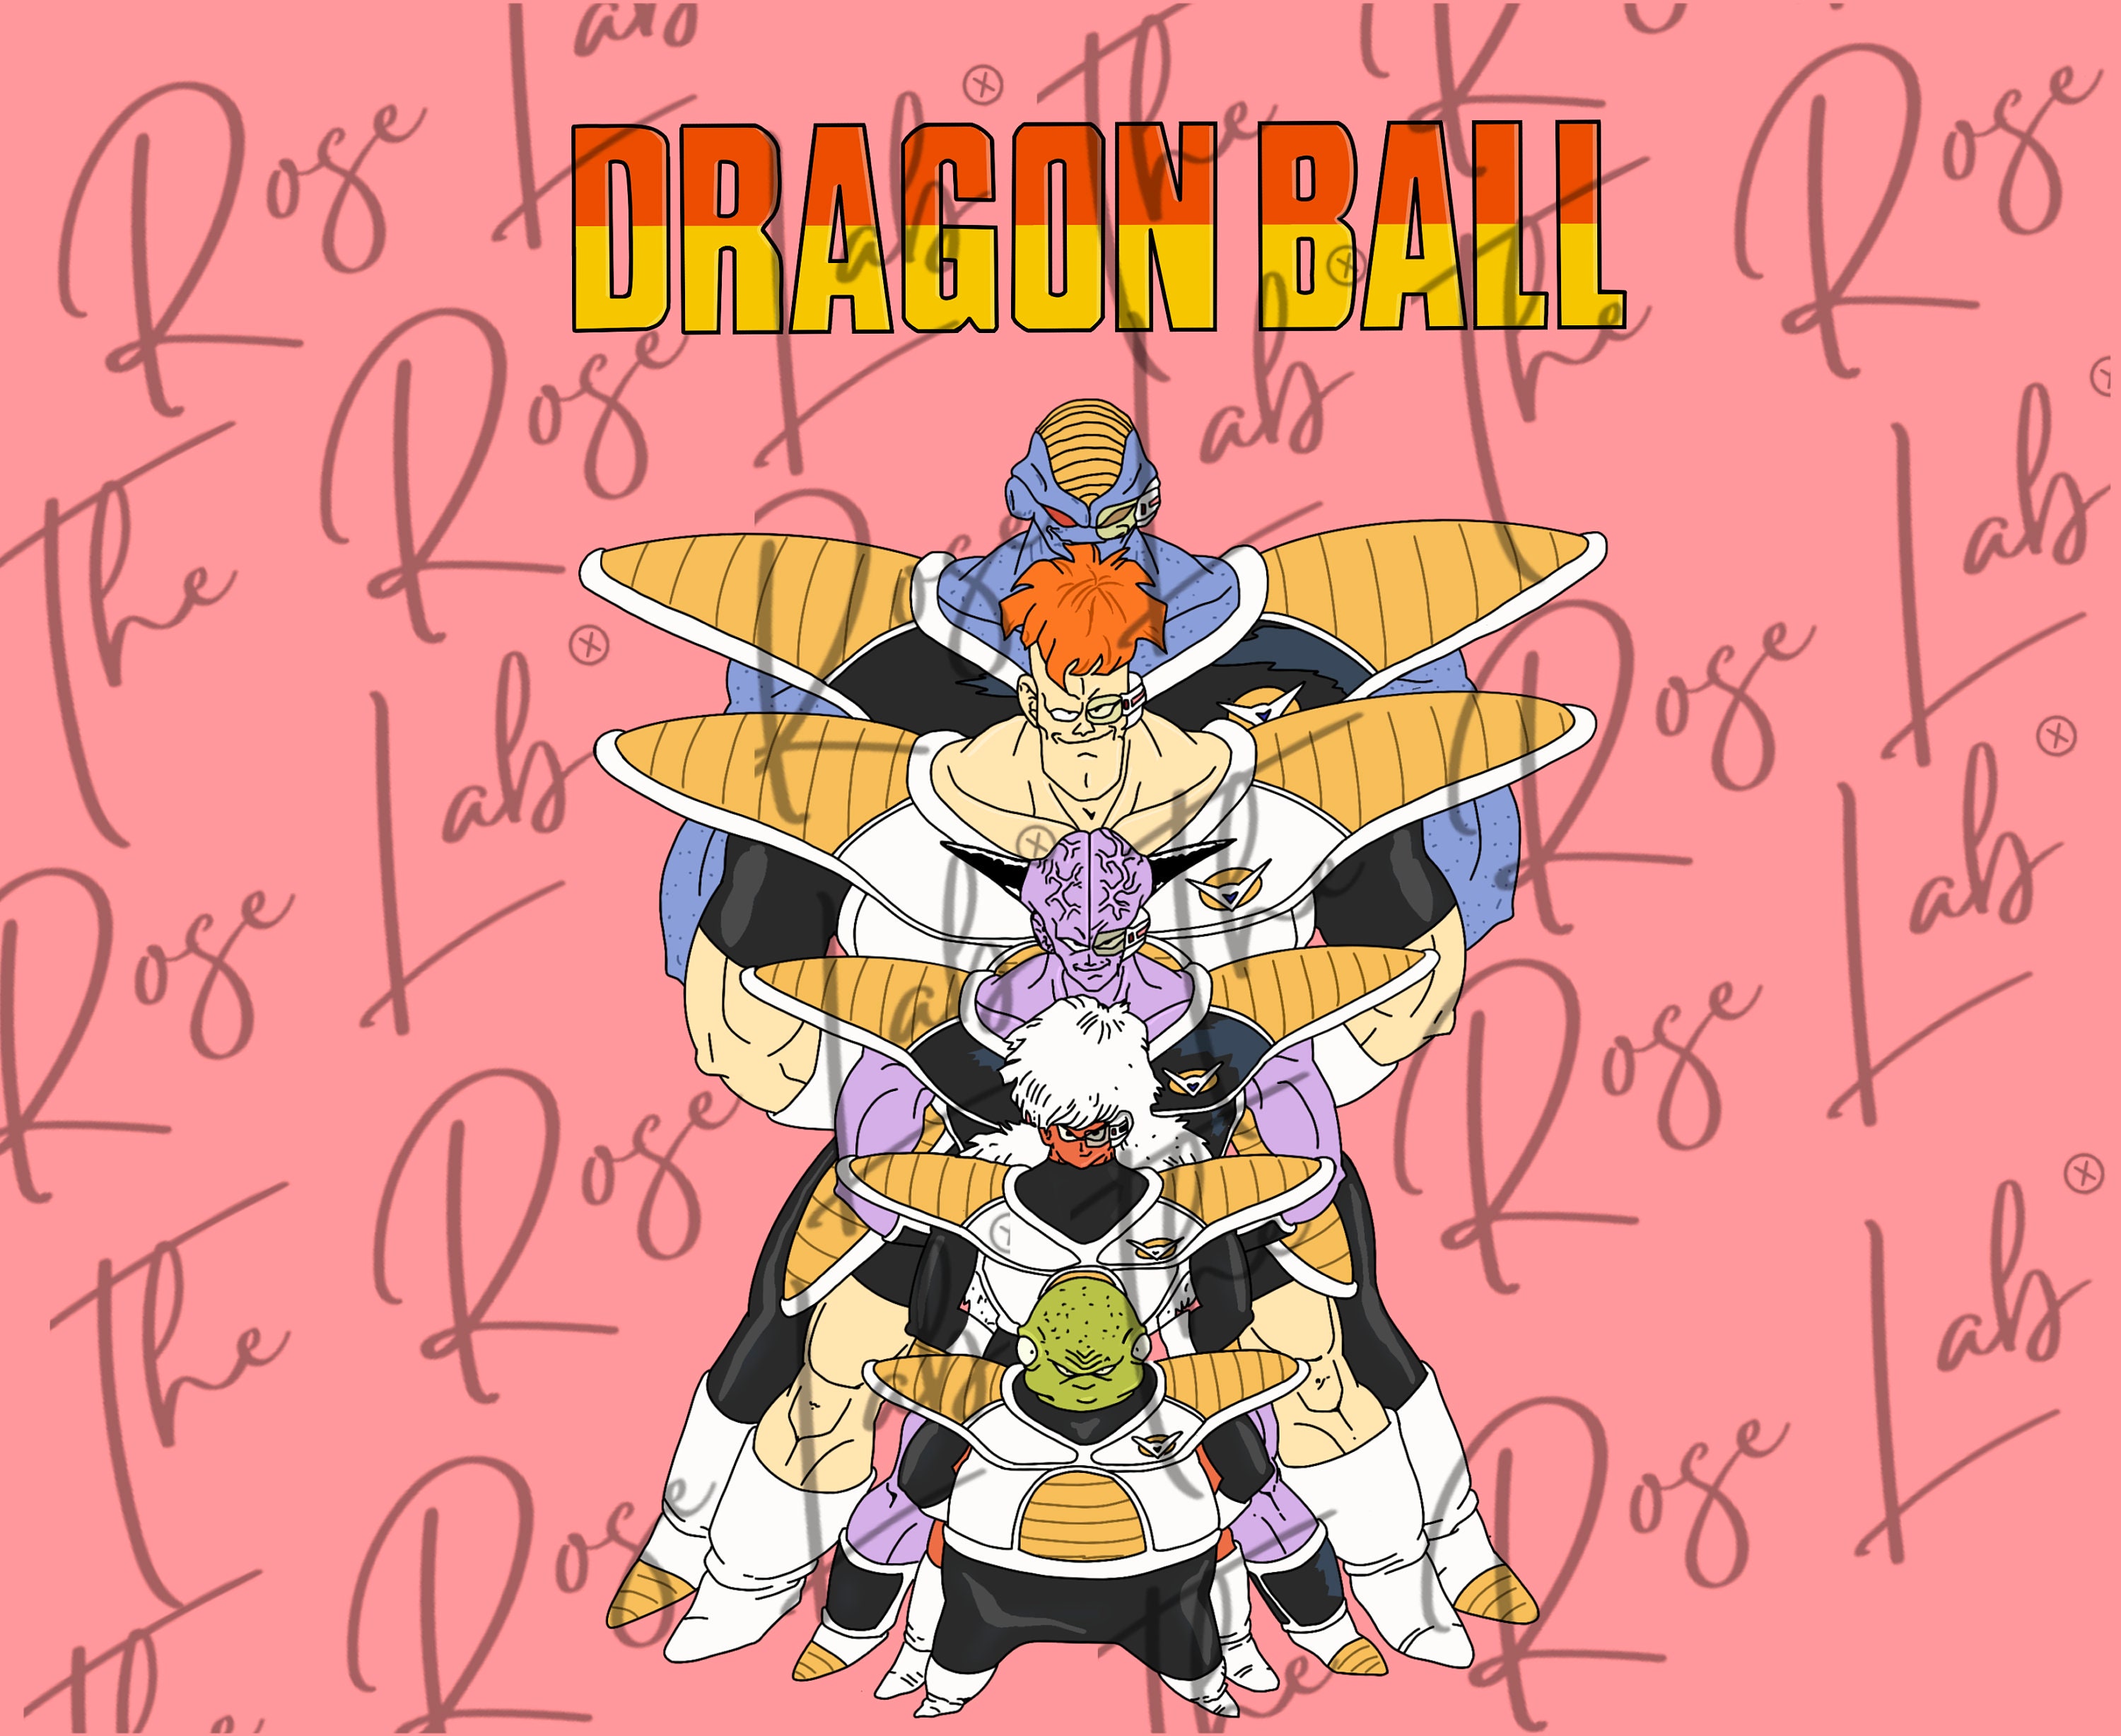 coloring Dragon Ball Z, page ginyu force to print out or color online